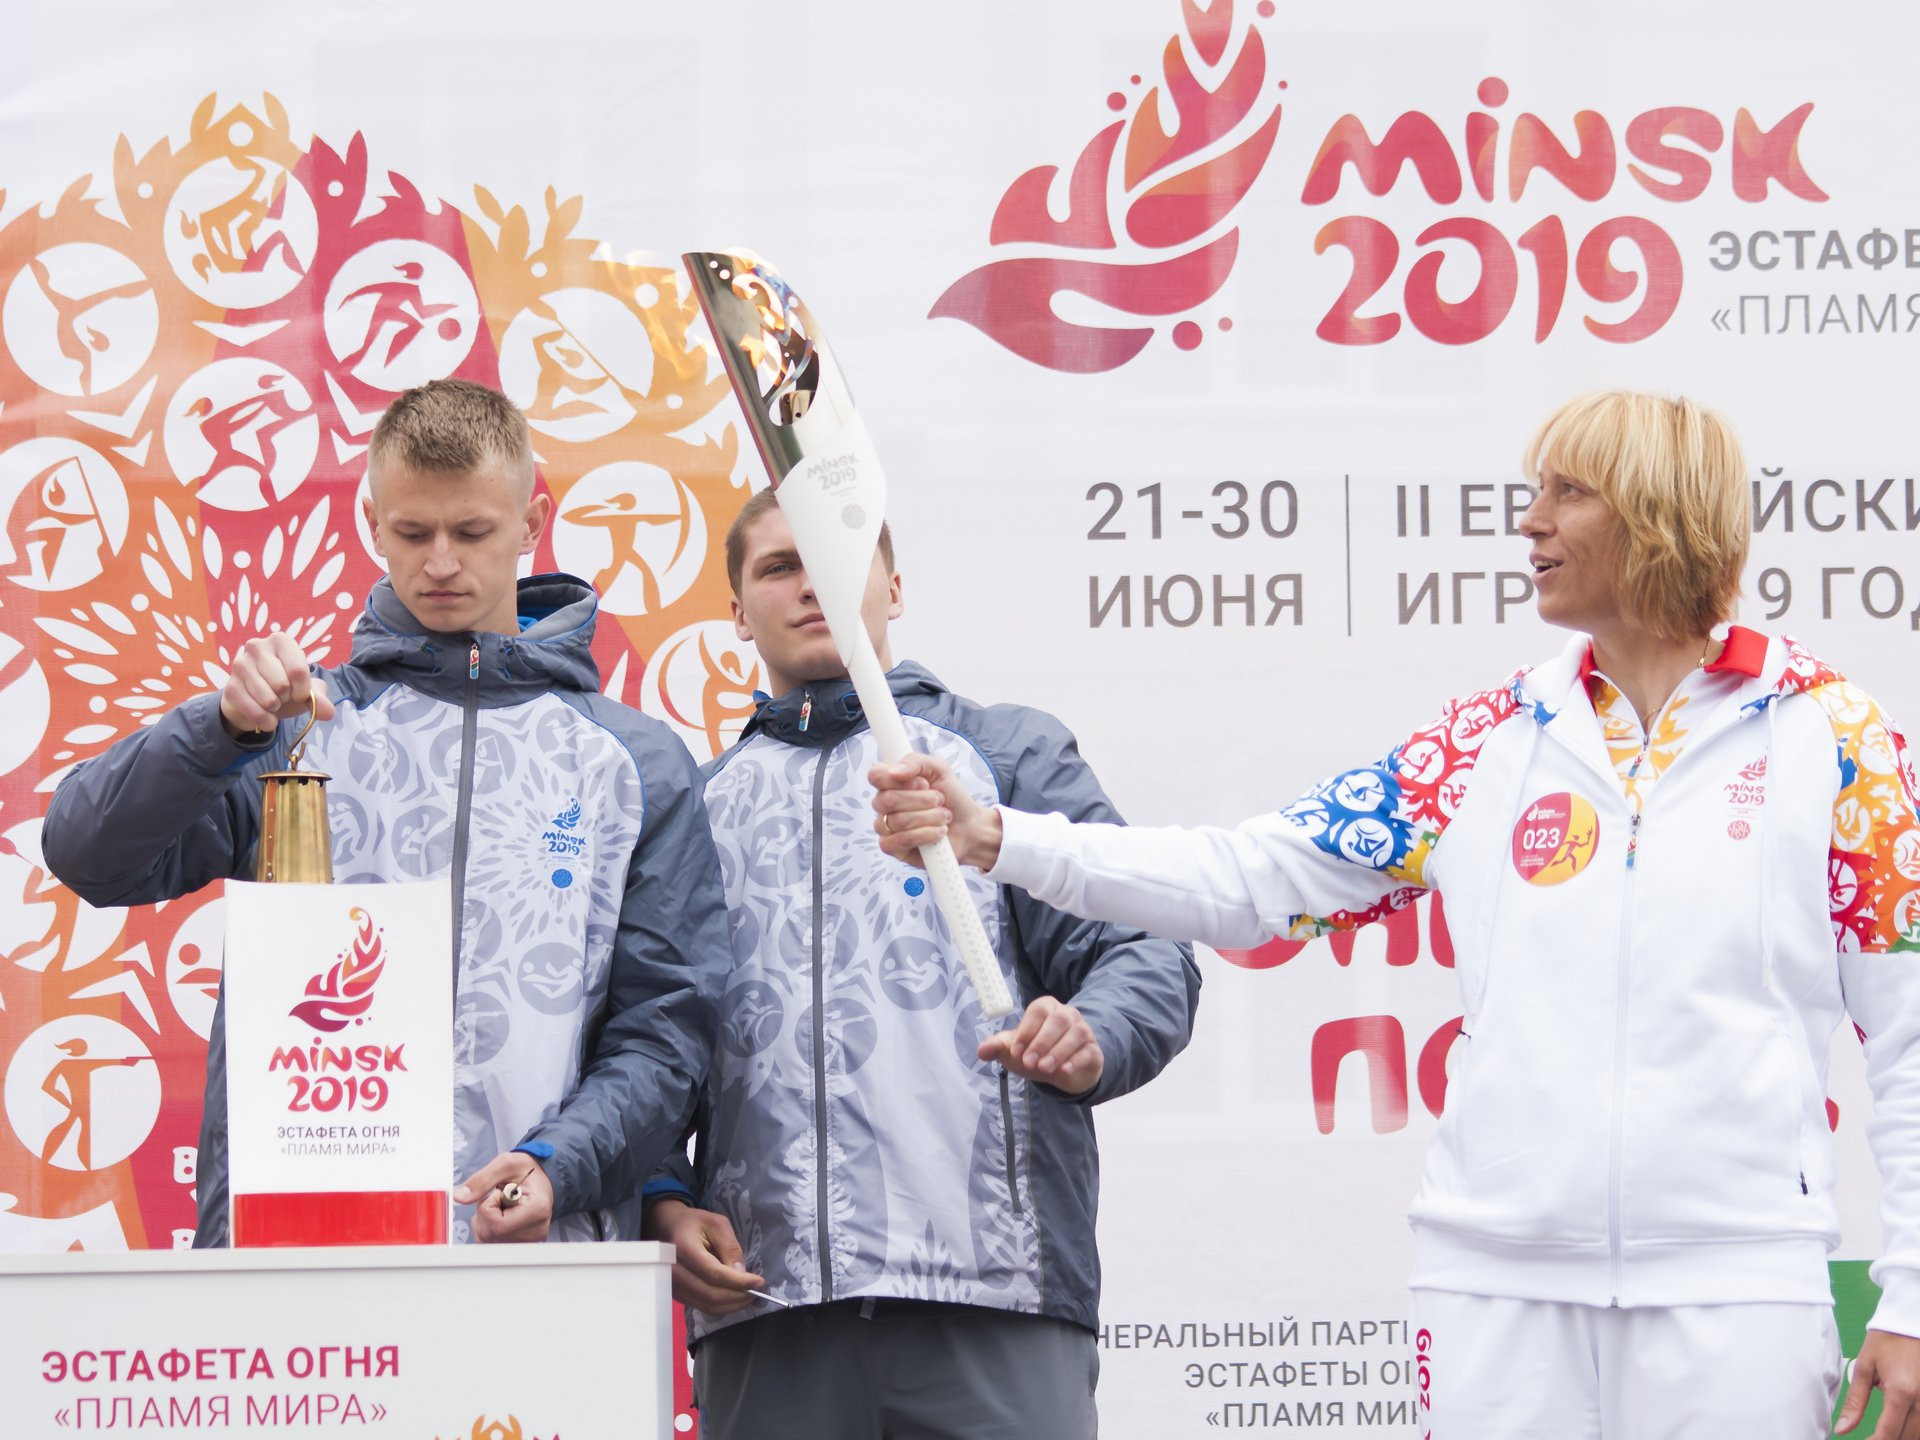 The 2019 European Games in Minsk will feature heavily on the agenda at the Seminar ©Getty Images